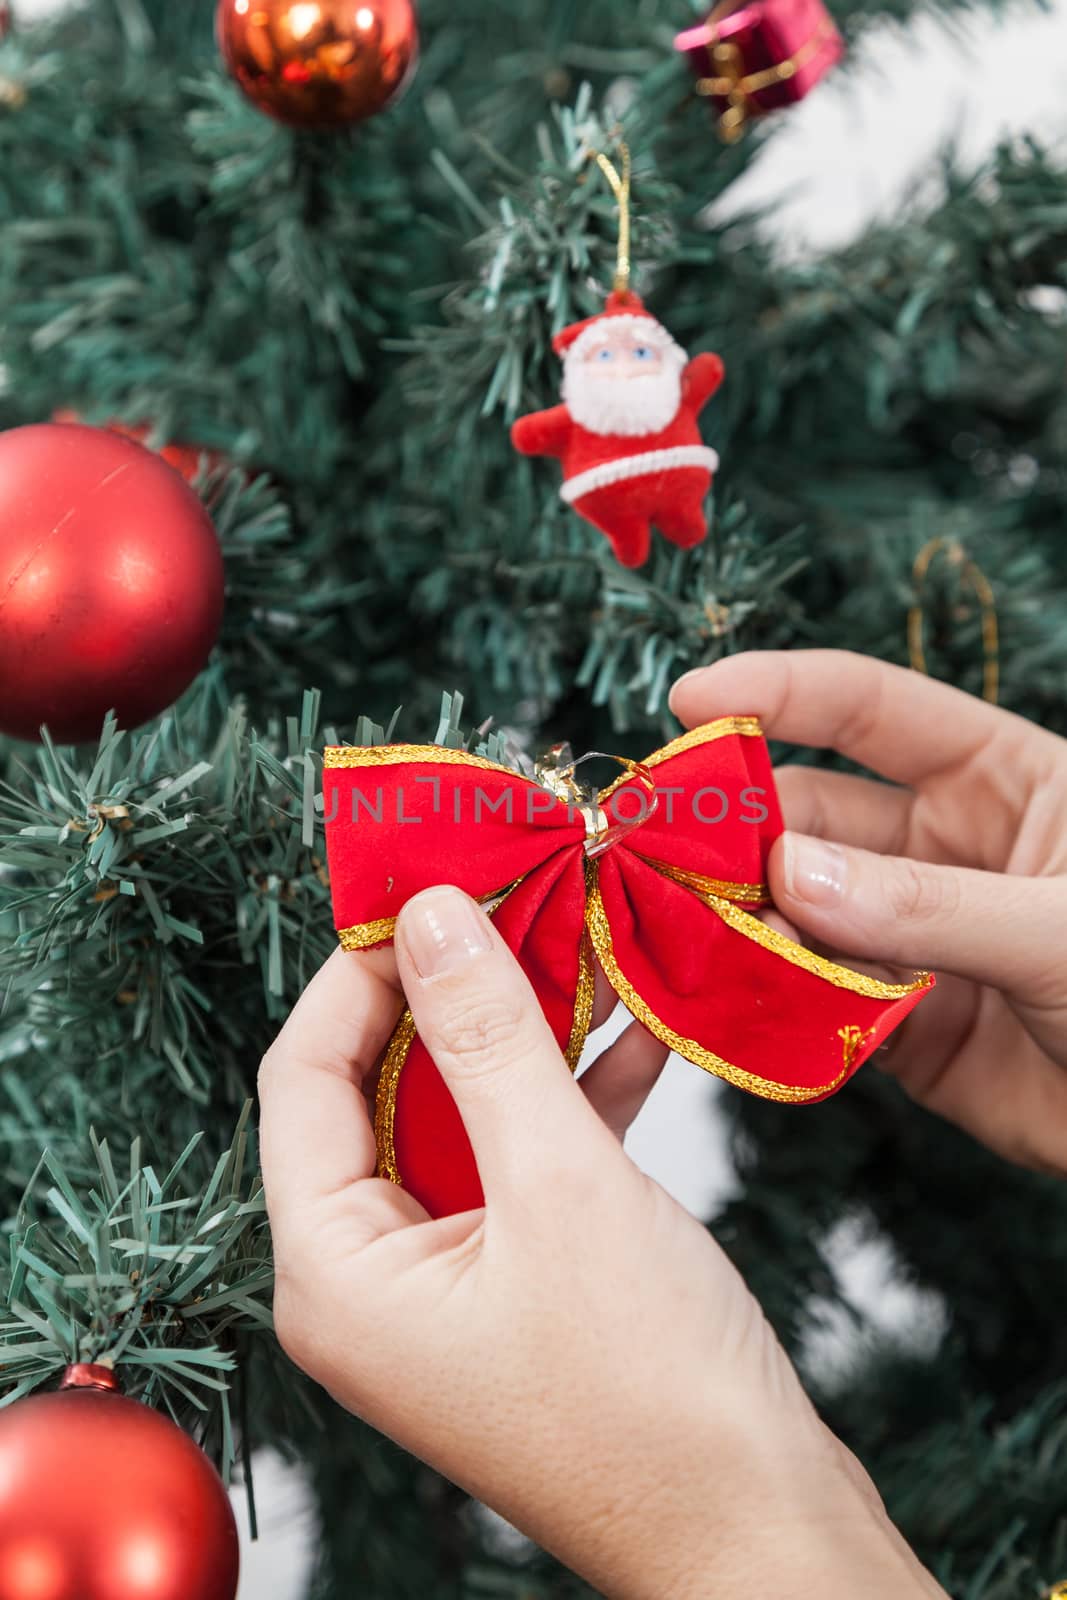 30-35, arms, background, balls, beautiful, bow, camera, casual, caucasian, celebration, christmas, cute, december, decorating, decoration, decorative, enjoying, female, festive, fingers, fun, girl, gorgeous, green, hand, hands, happiness, happy, holding, holiday, home, human, joy, lady, look, looking, merry, model, nice, old, one, people, person, portrait, positive, pretty, vertical, property, red, releases, ribbon, season, smile, smiling, tree, white, winter, woman, x-mas, xmas, years, young